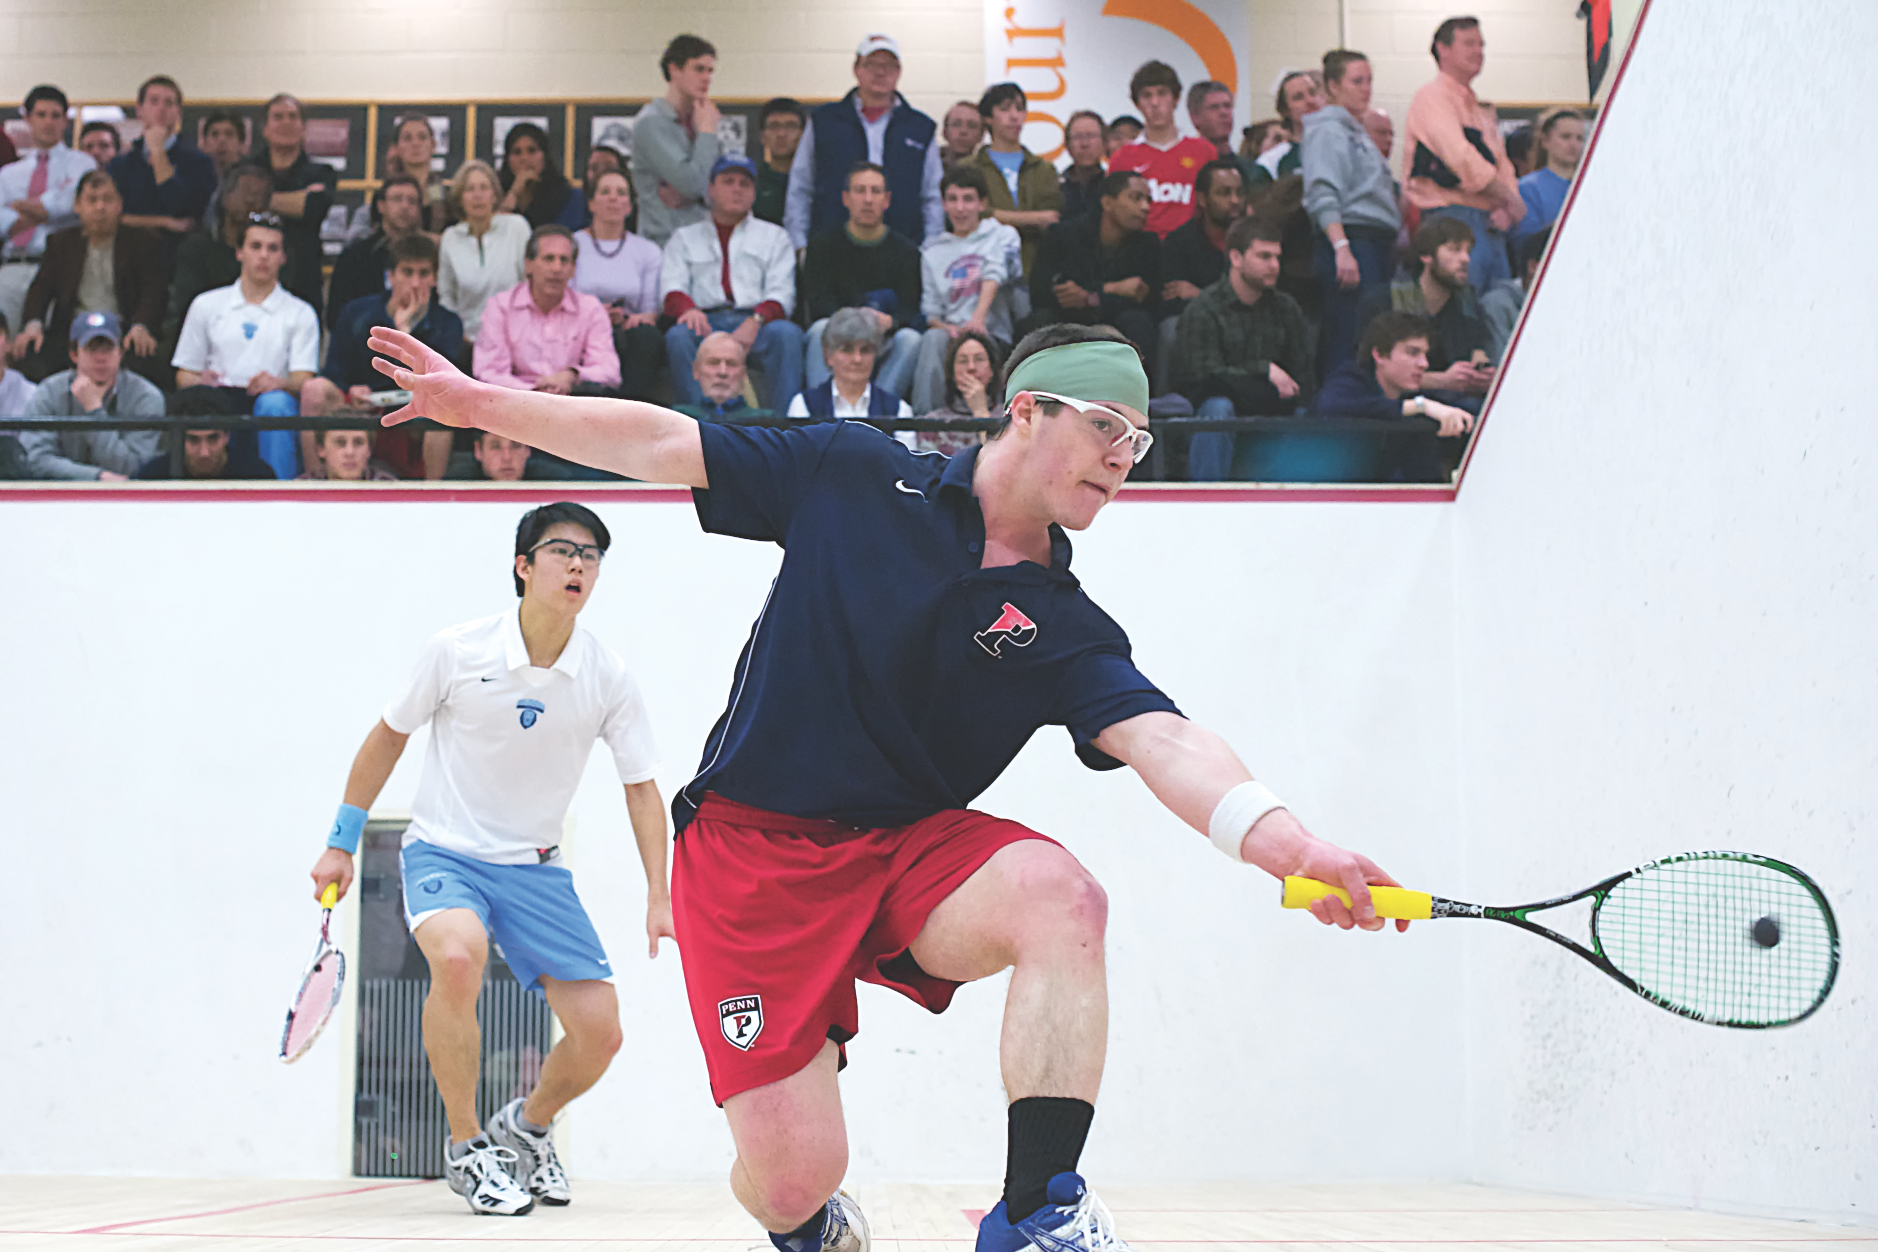 In the Men’s CSA Team Championships, Hoehn Division finals, Penn’s Danny Greenberg (right) helped the Quakers to the title, beating Columbia University’s Anthonly Zou in four games.